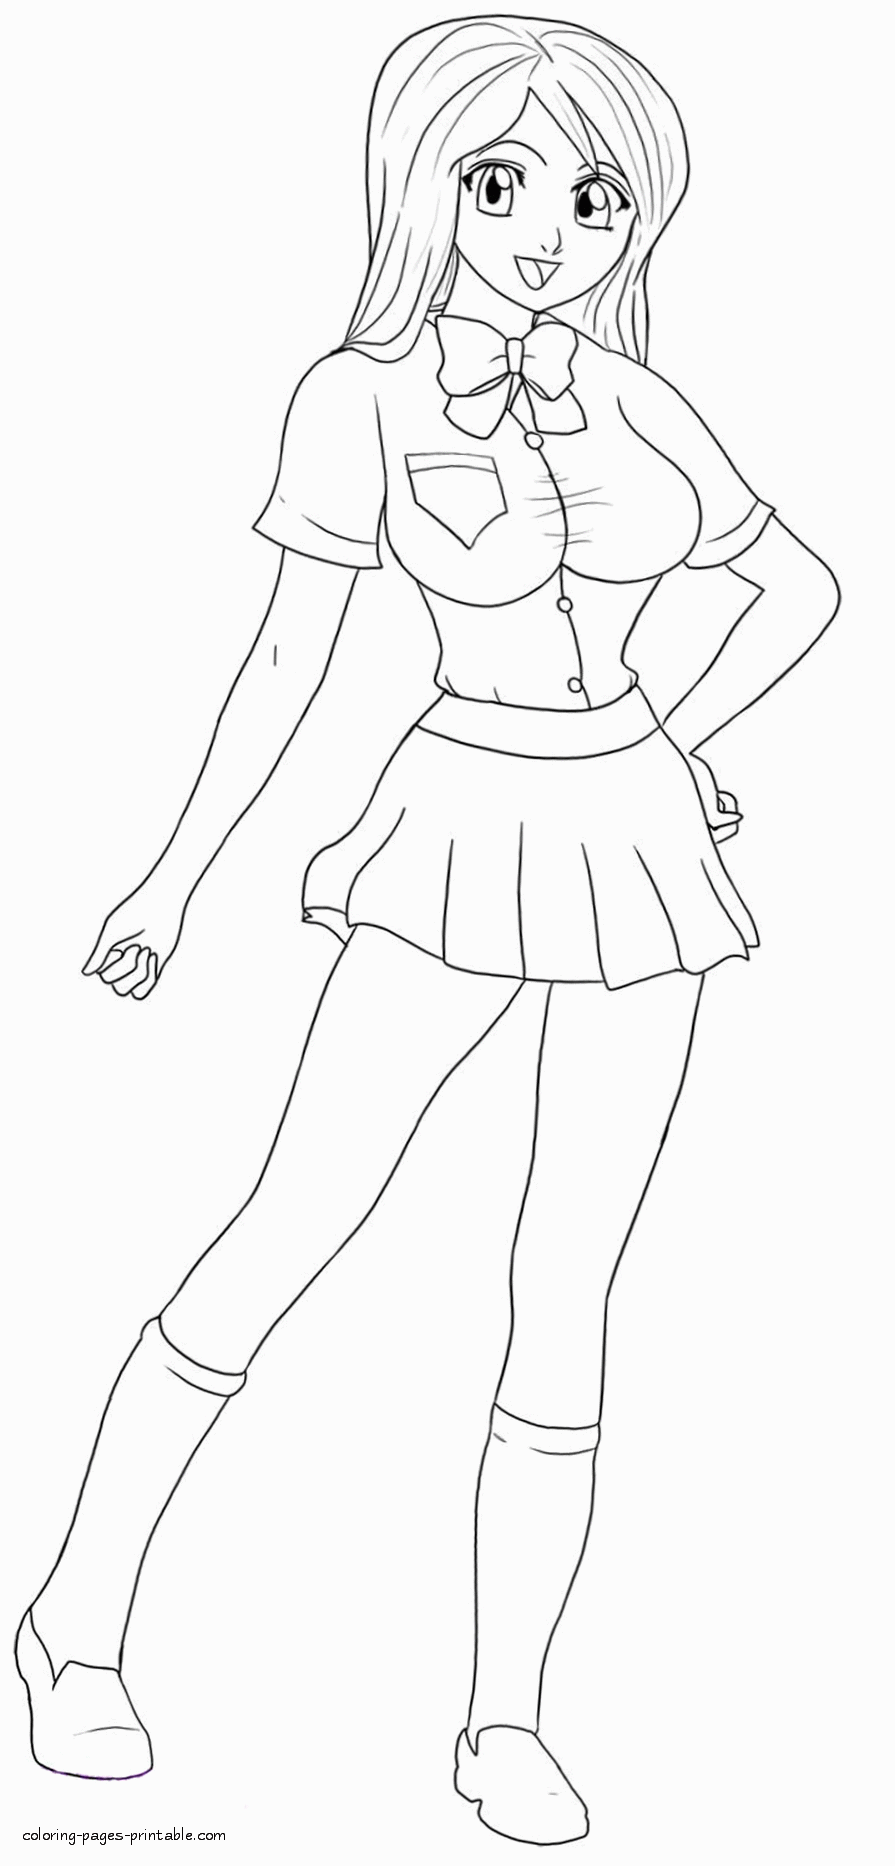 Bleach coloring pages of Orihime Inoue. Anime girls